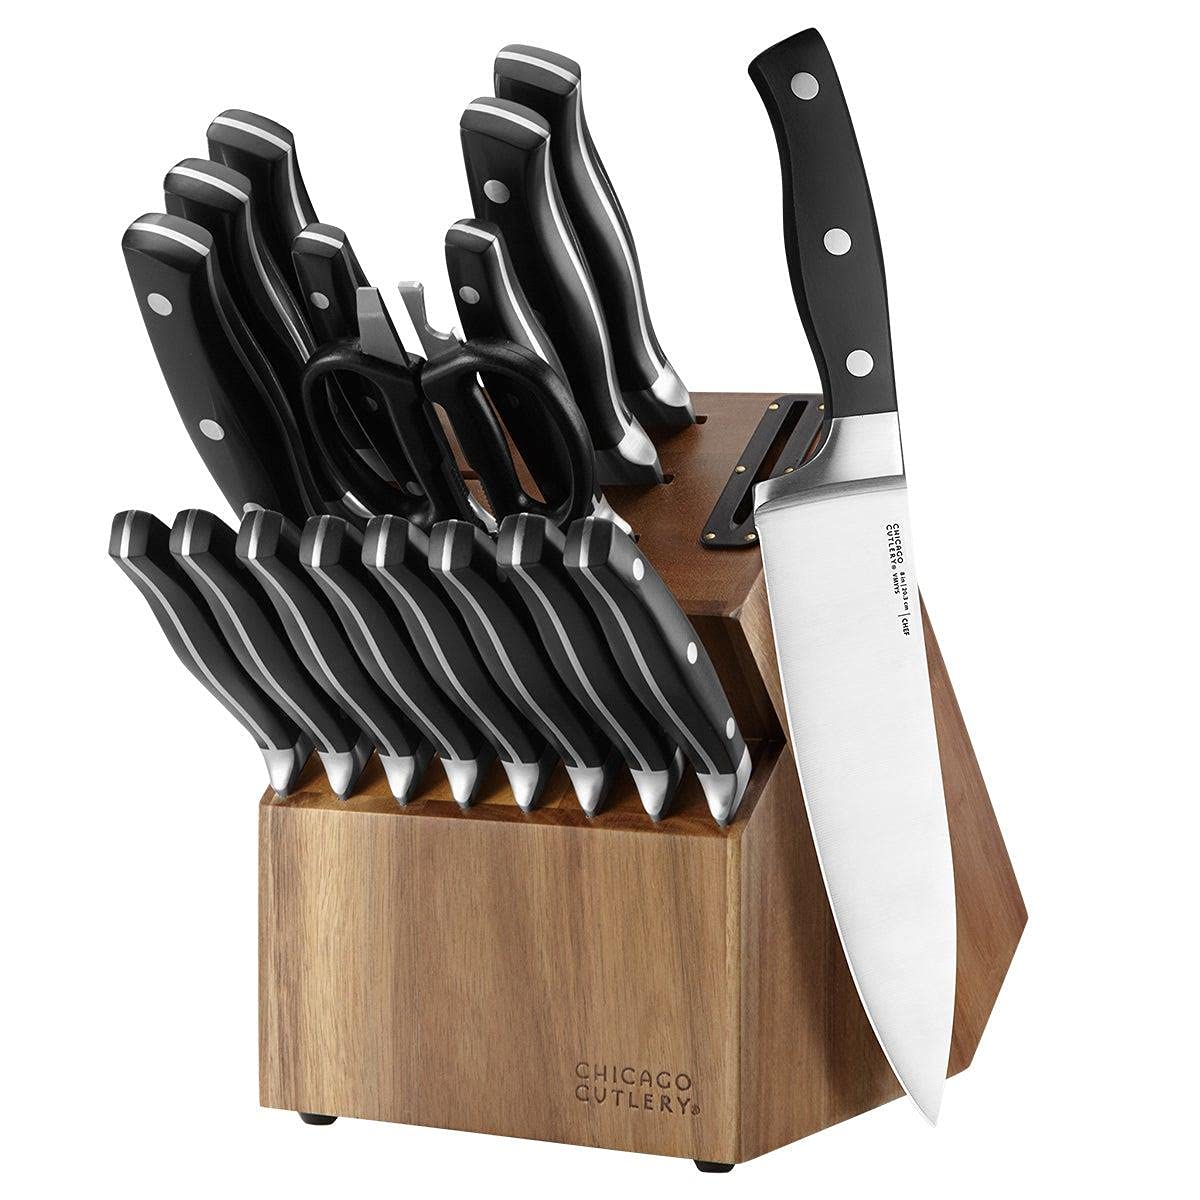 Corelle chicago cutlery Insignia Stainless Steel 18-Piece Knife Block Set cutlery Set